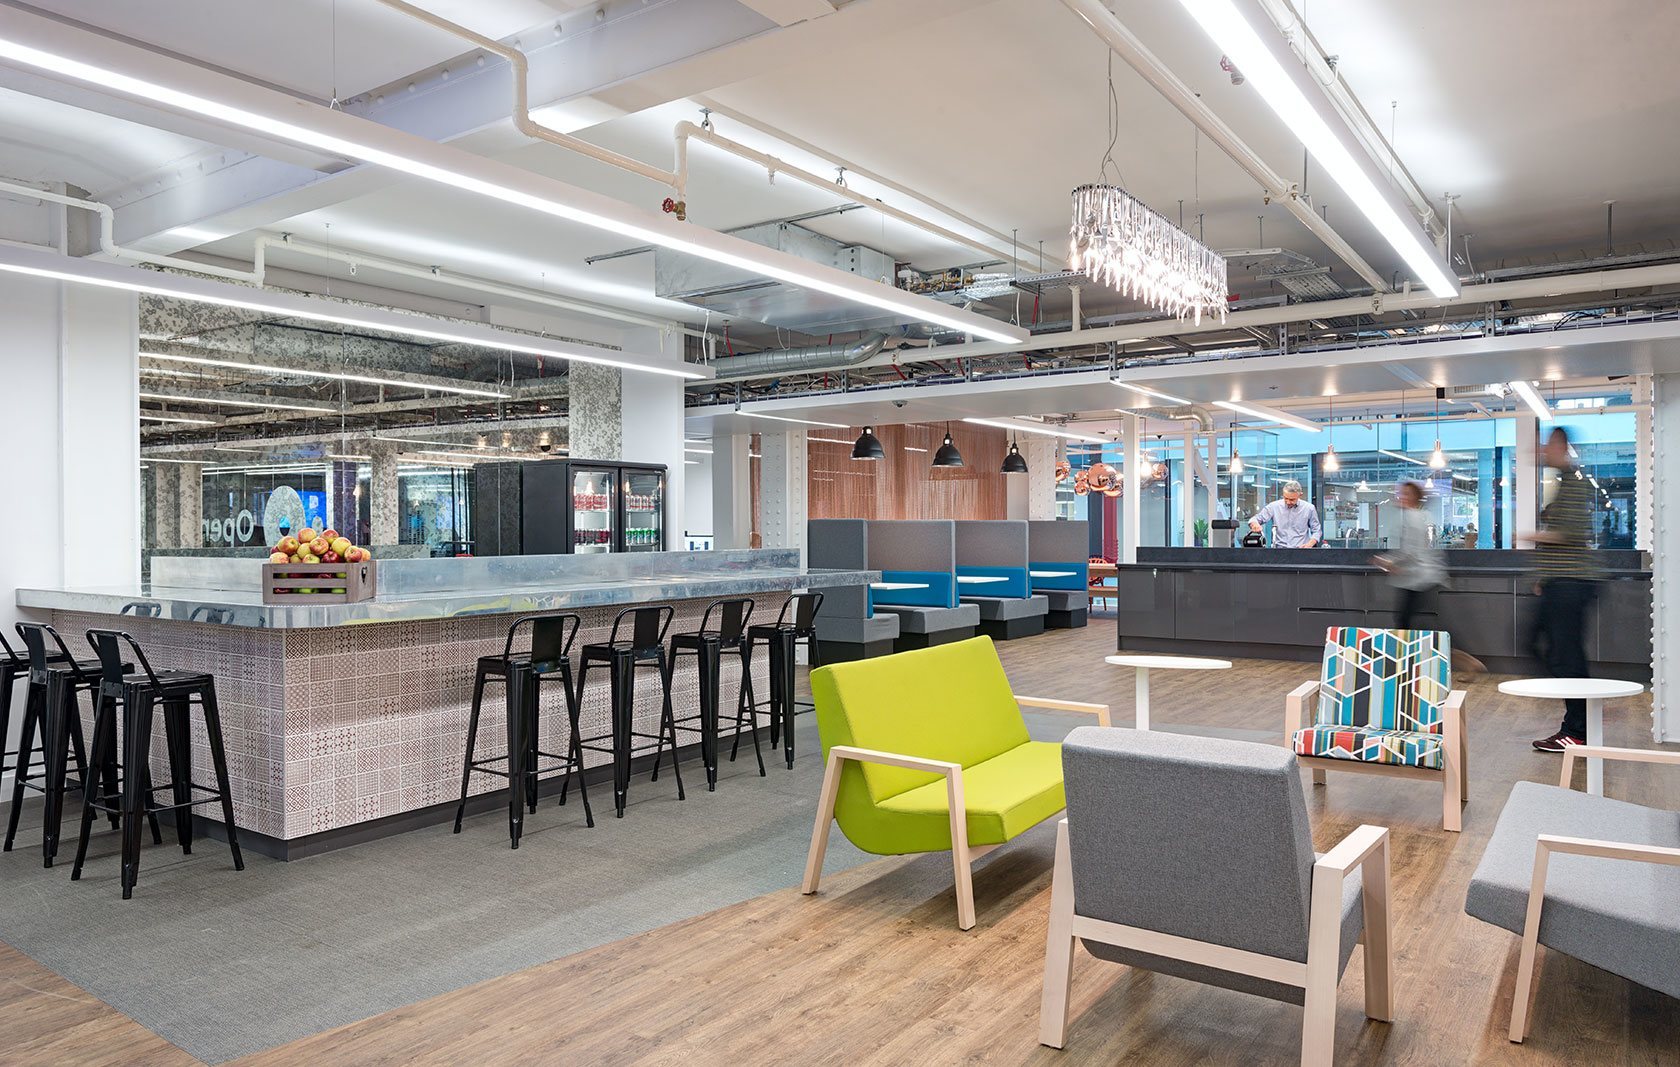 A Tour of OpenTable's New Beautiful London Office - Officelovin